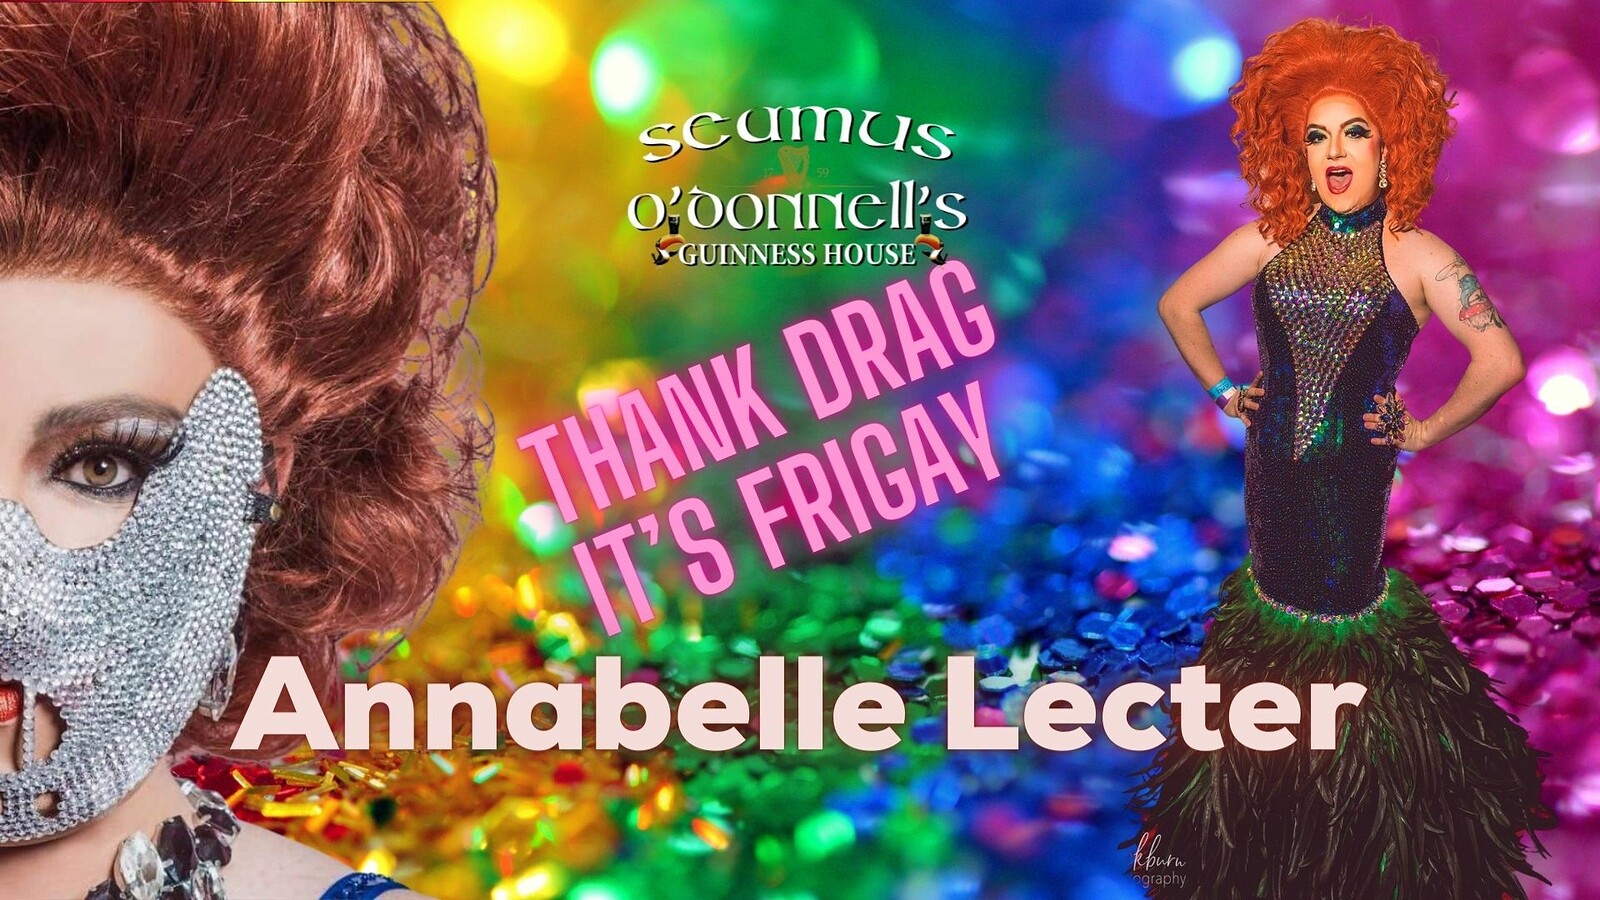 Thank Drag it's FriGay with Annabelle Lecter at Seamus O'Donnell's